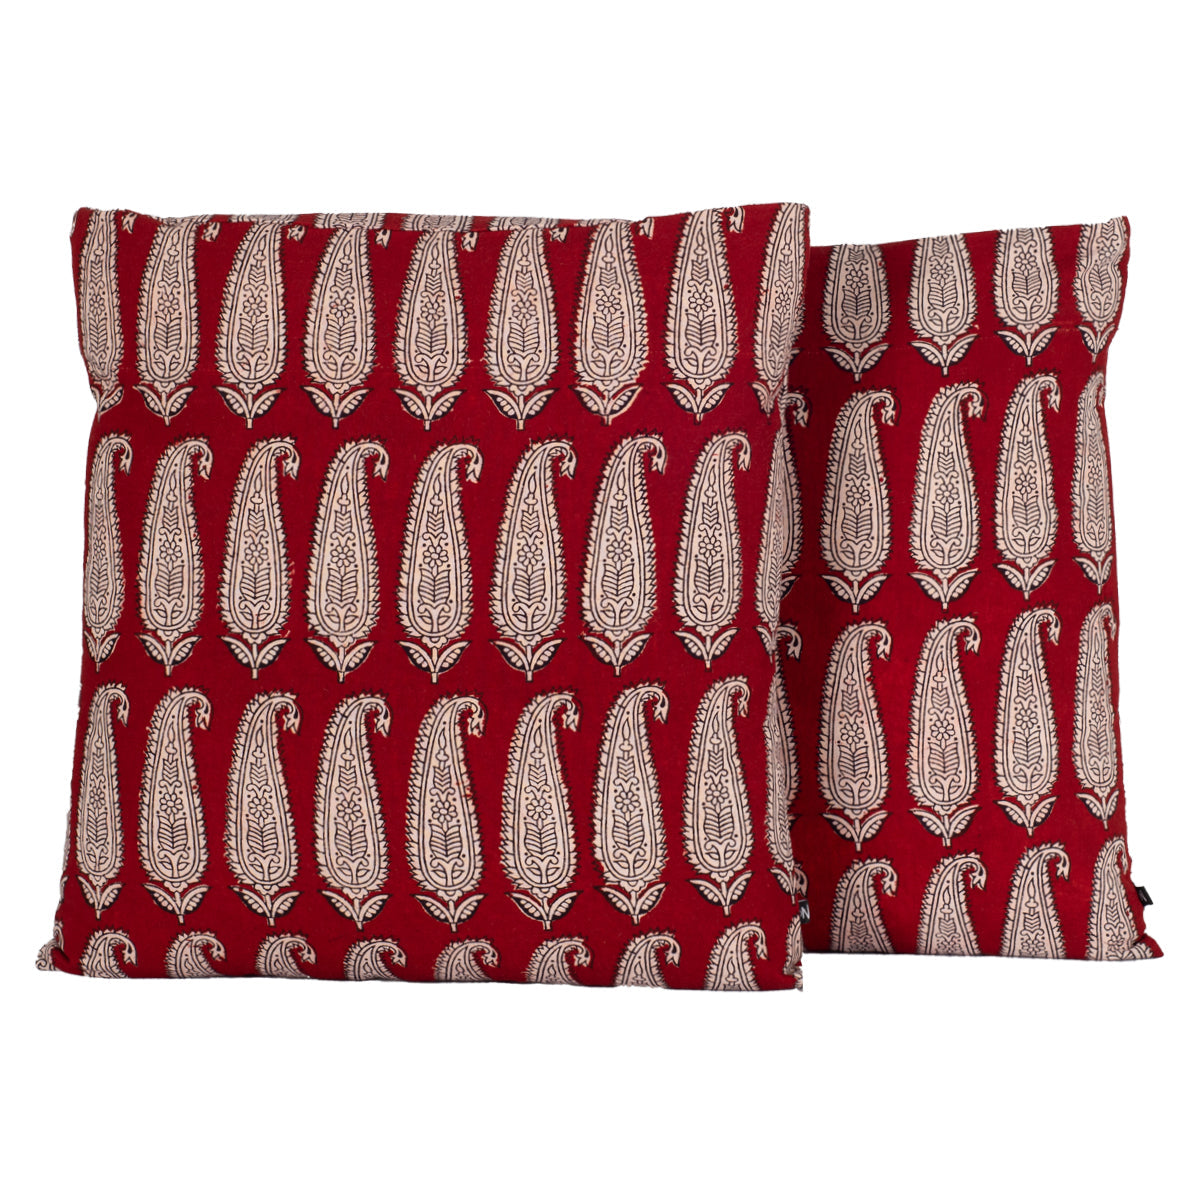 Paisley Bagh Hand Block Print Cotton Cushion Cover - Red-2